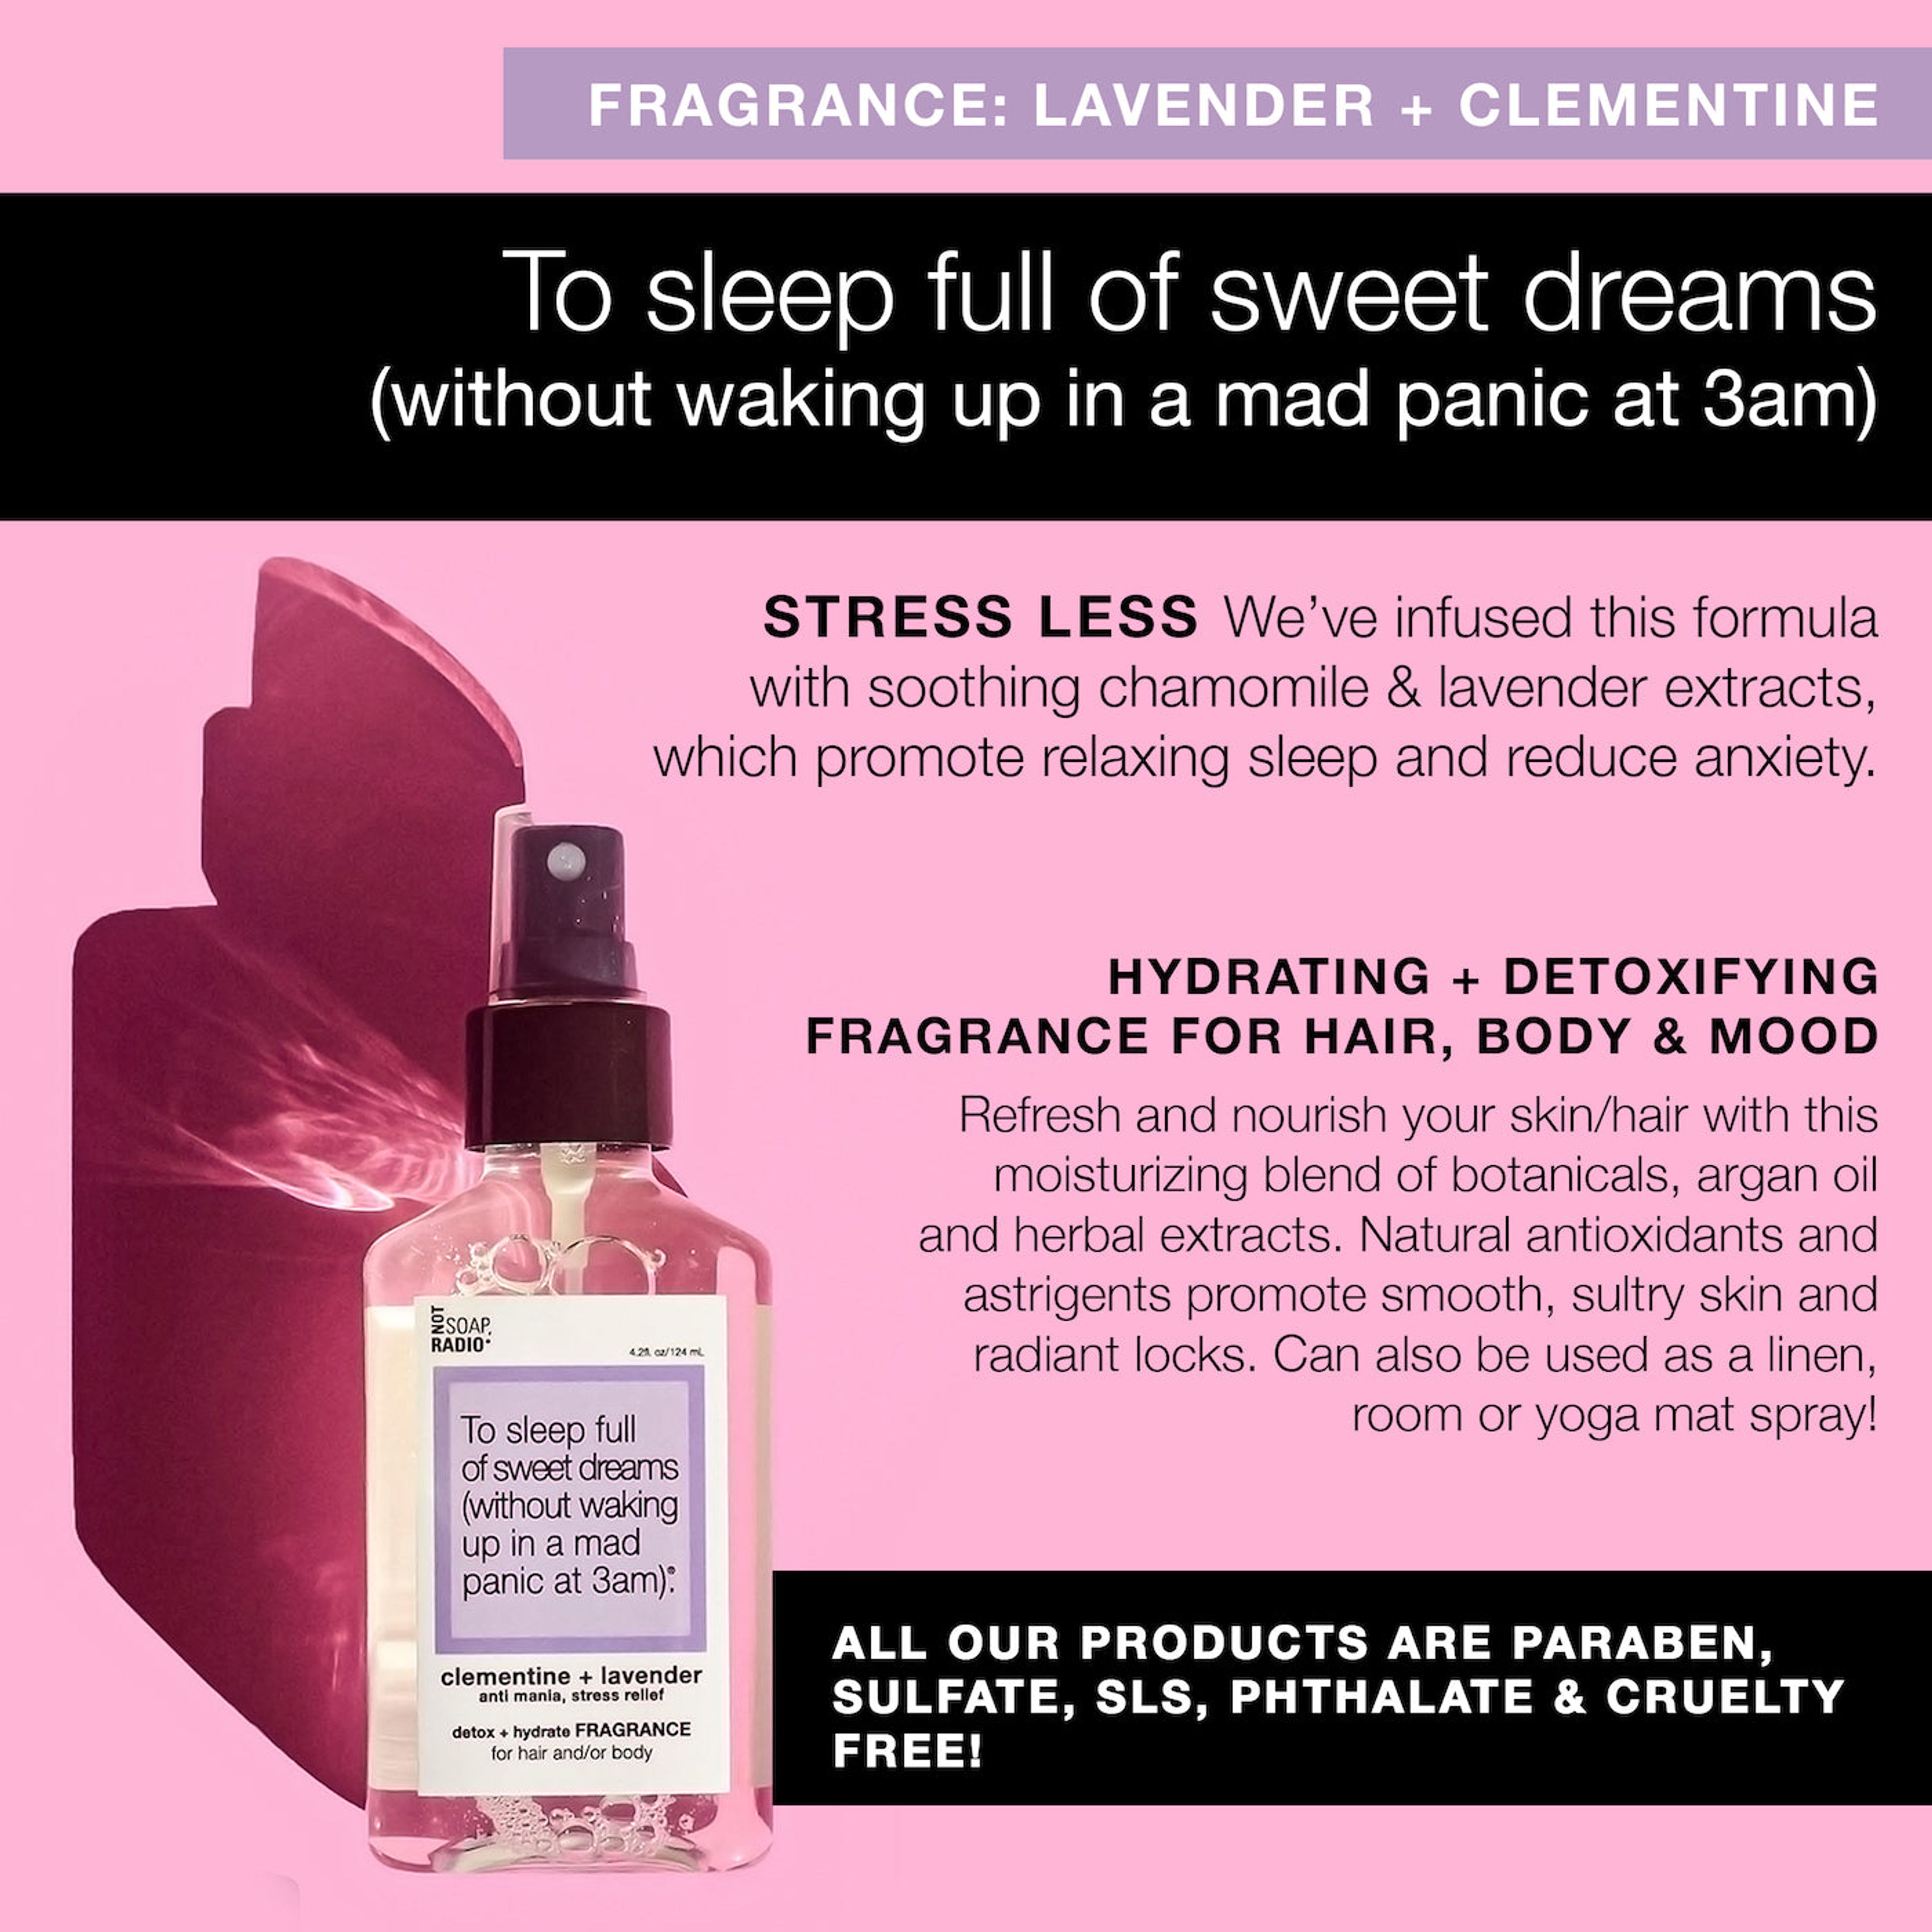 To sleep full of sweet dreams (without waking up in a mad panic at 3am). fragrance